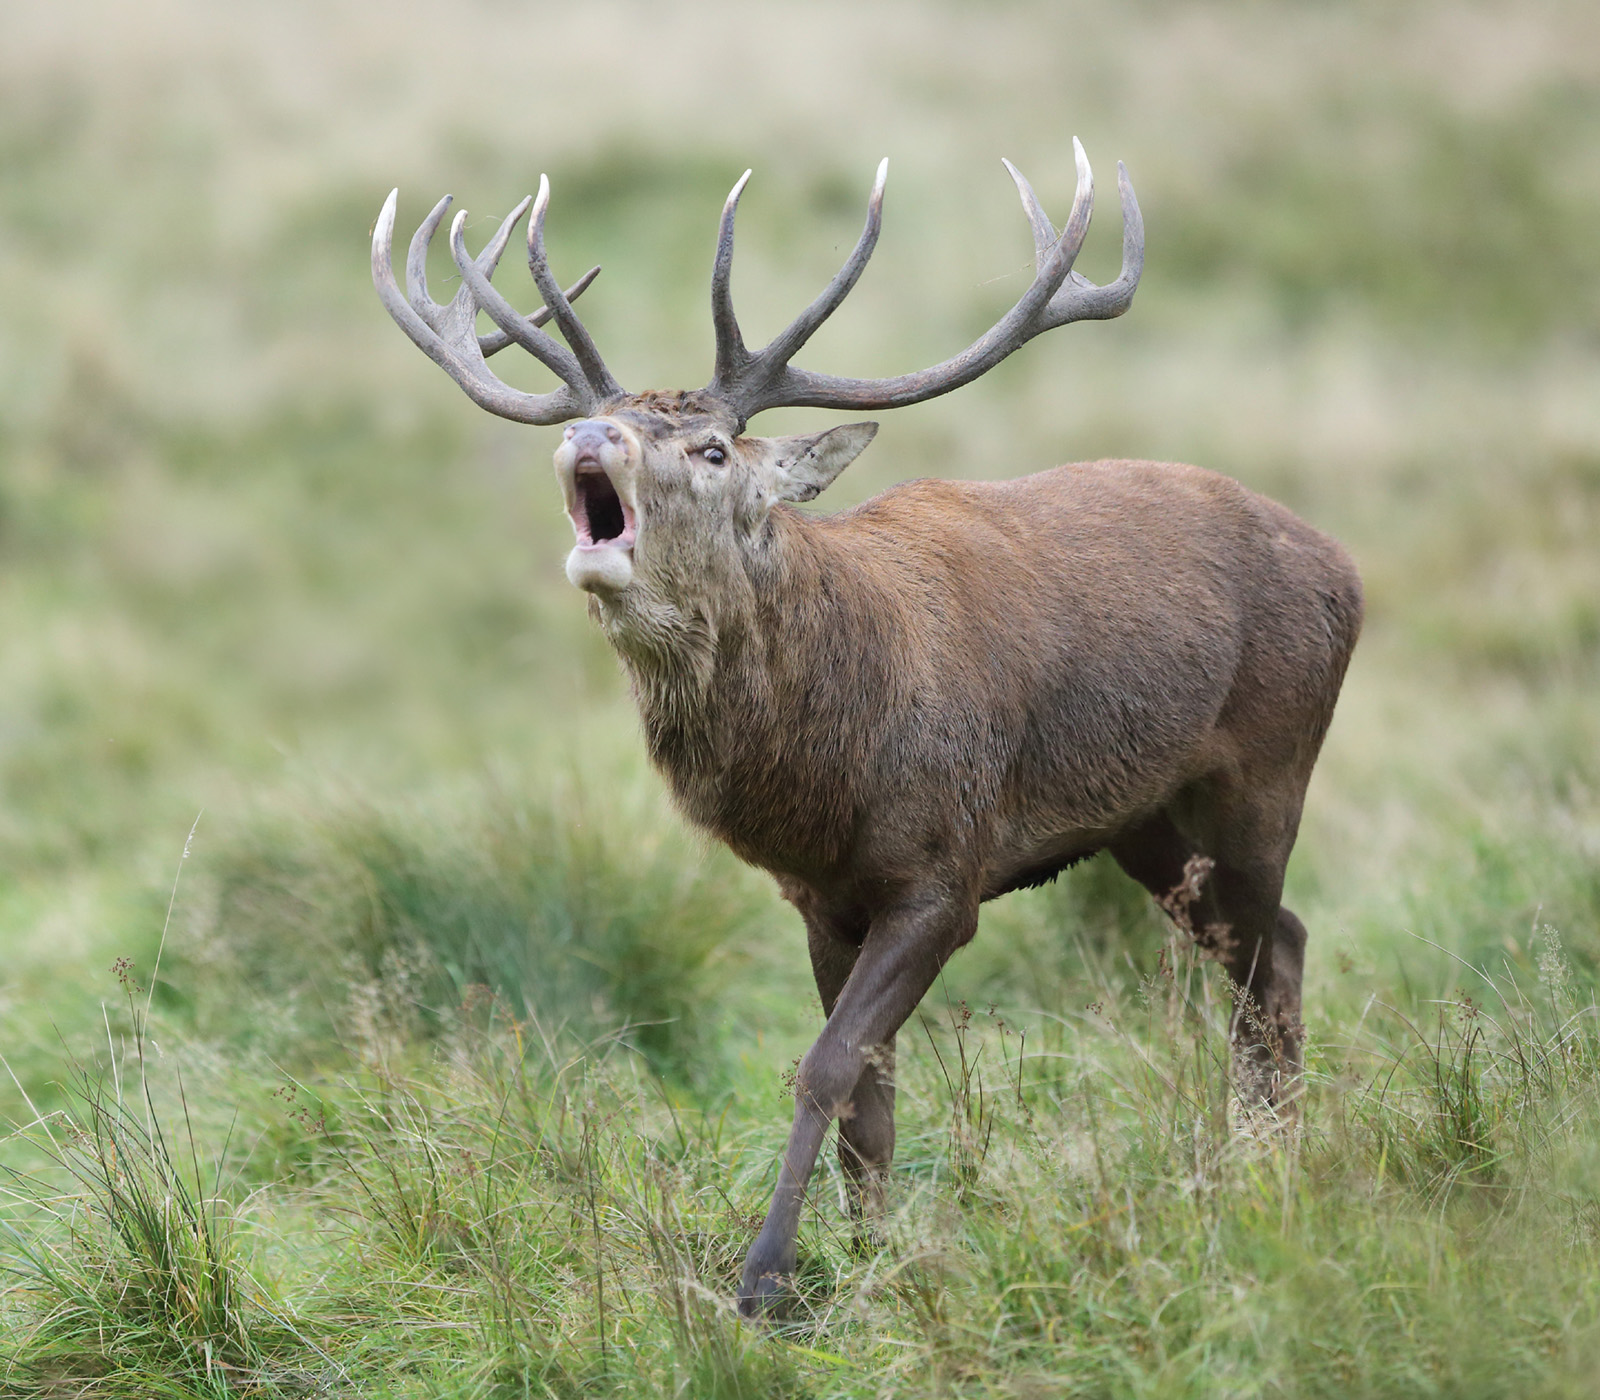 B.White Advanced Bellowing Red Deer Stag The Rutting Season